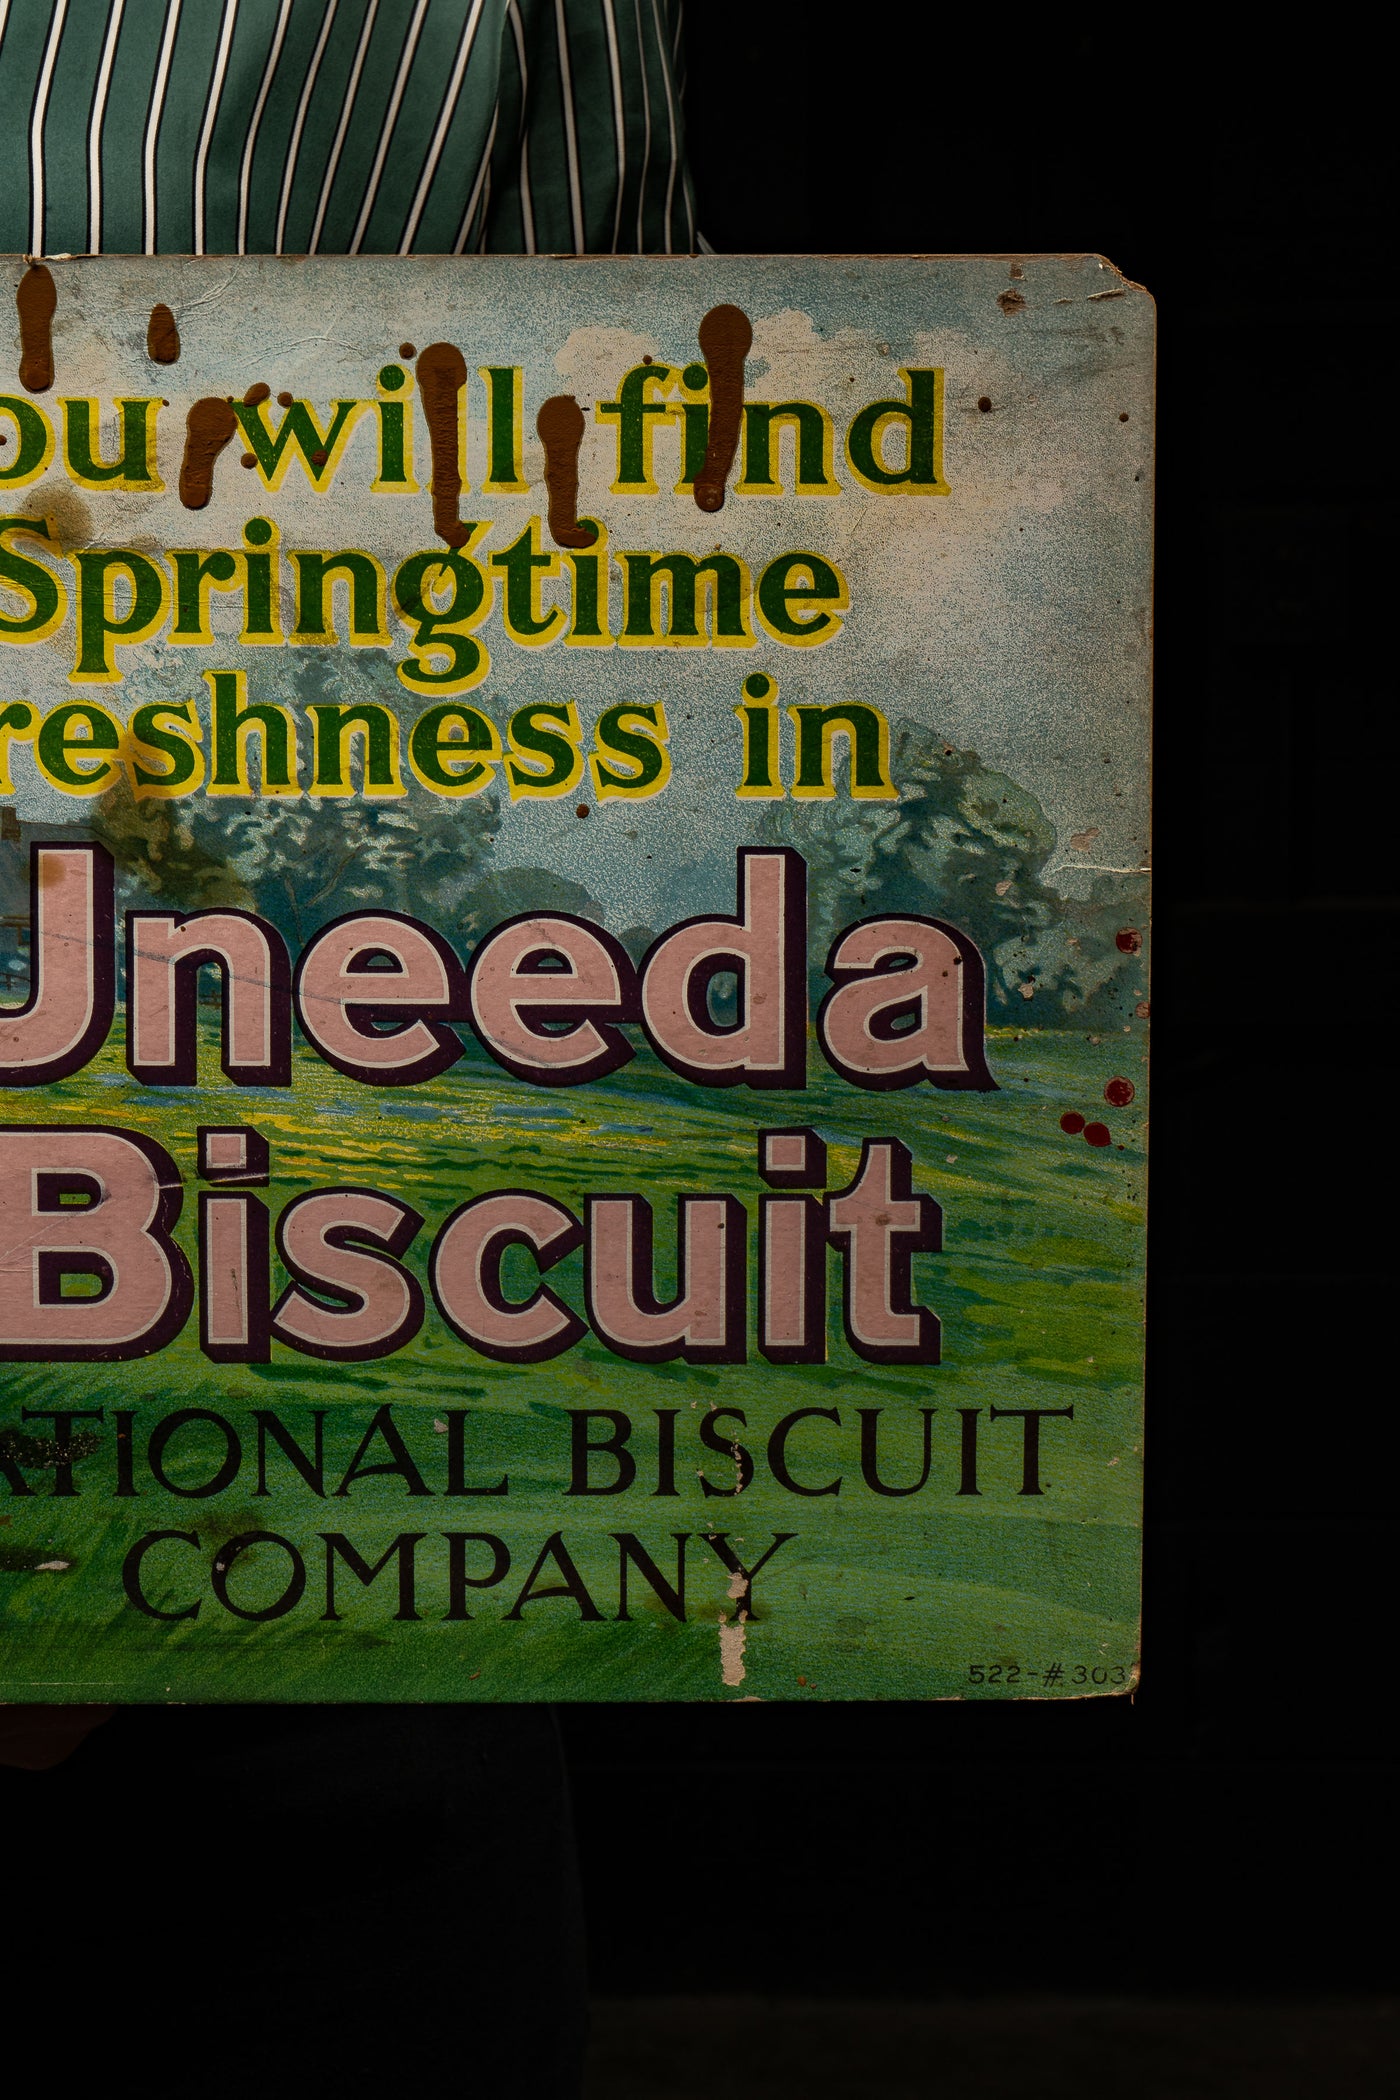 Early 20th Century (Pre-Nabisco) Uneeda Biscuit Trolley Car Advertising Sign